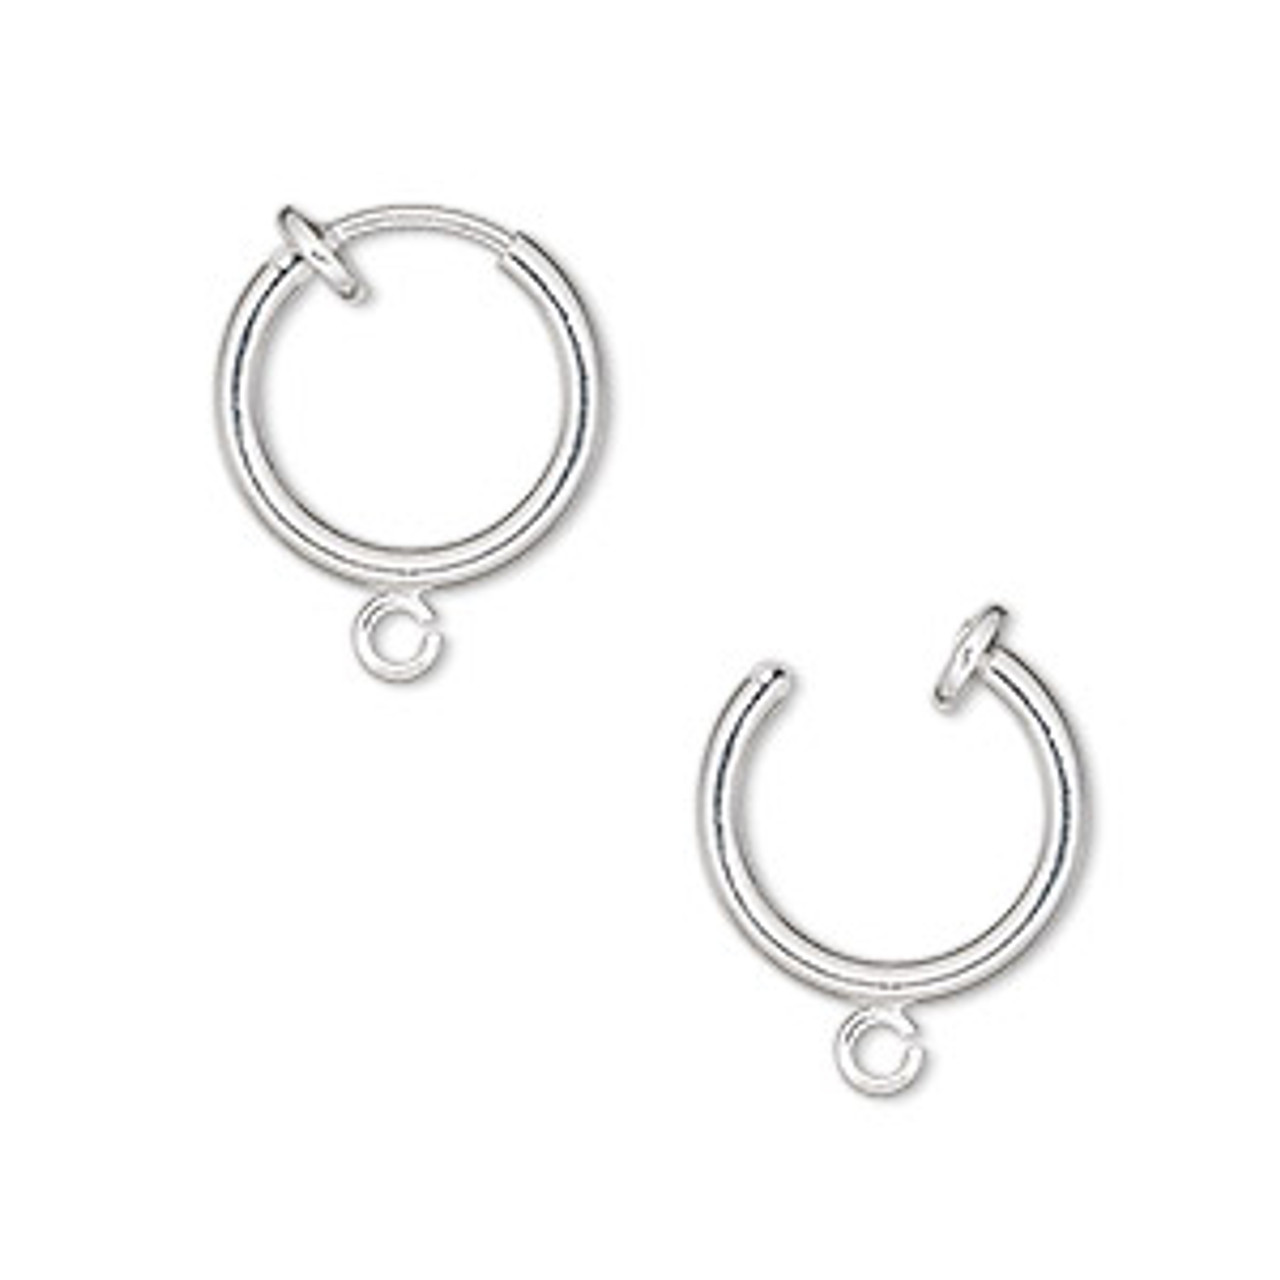 13mm Round Hoop with Pierced Look Silver Plated (1 Pair)